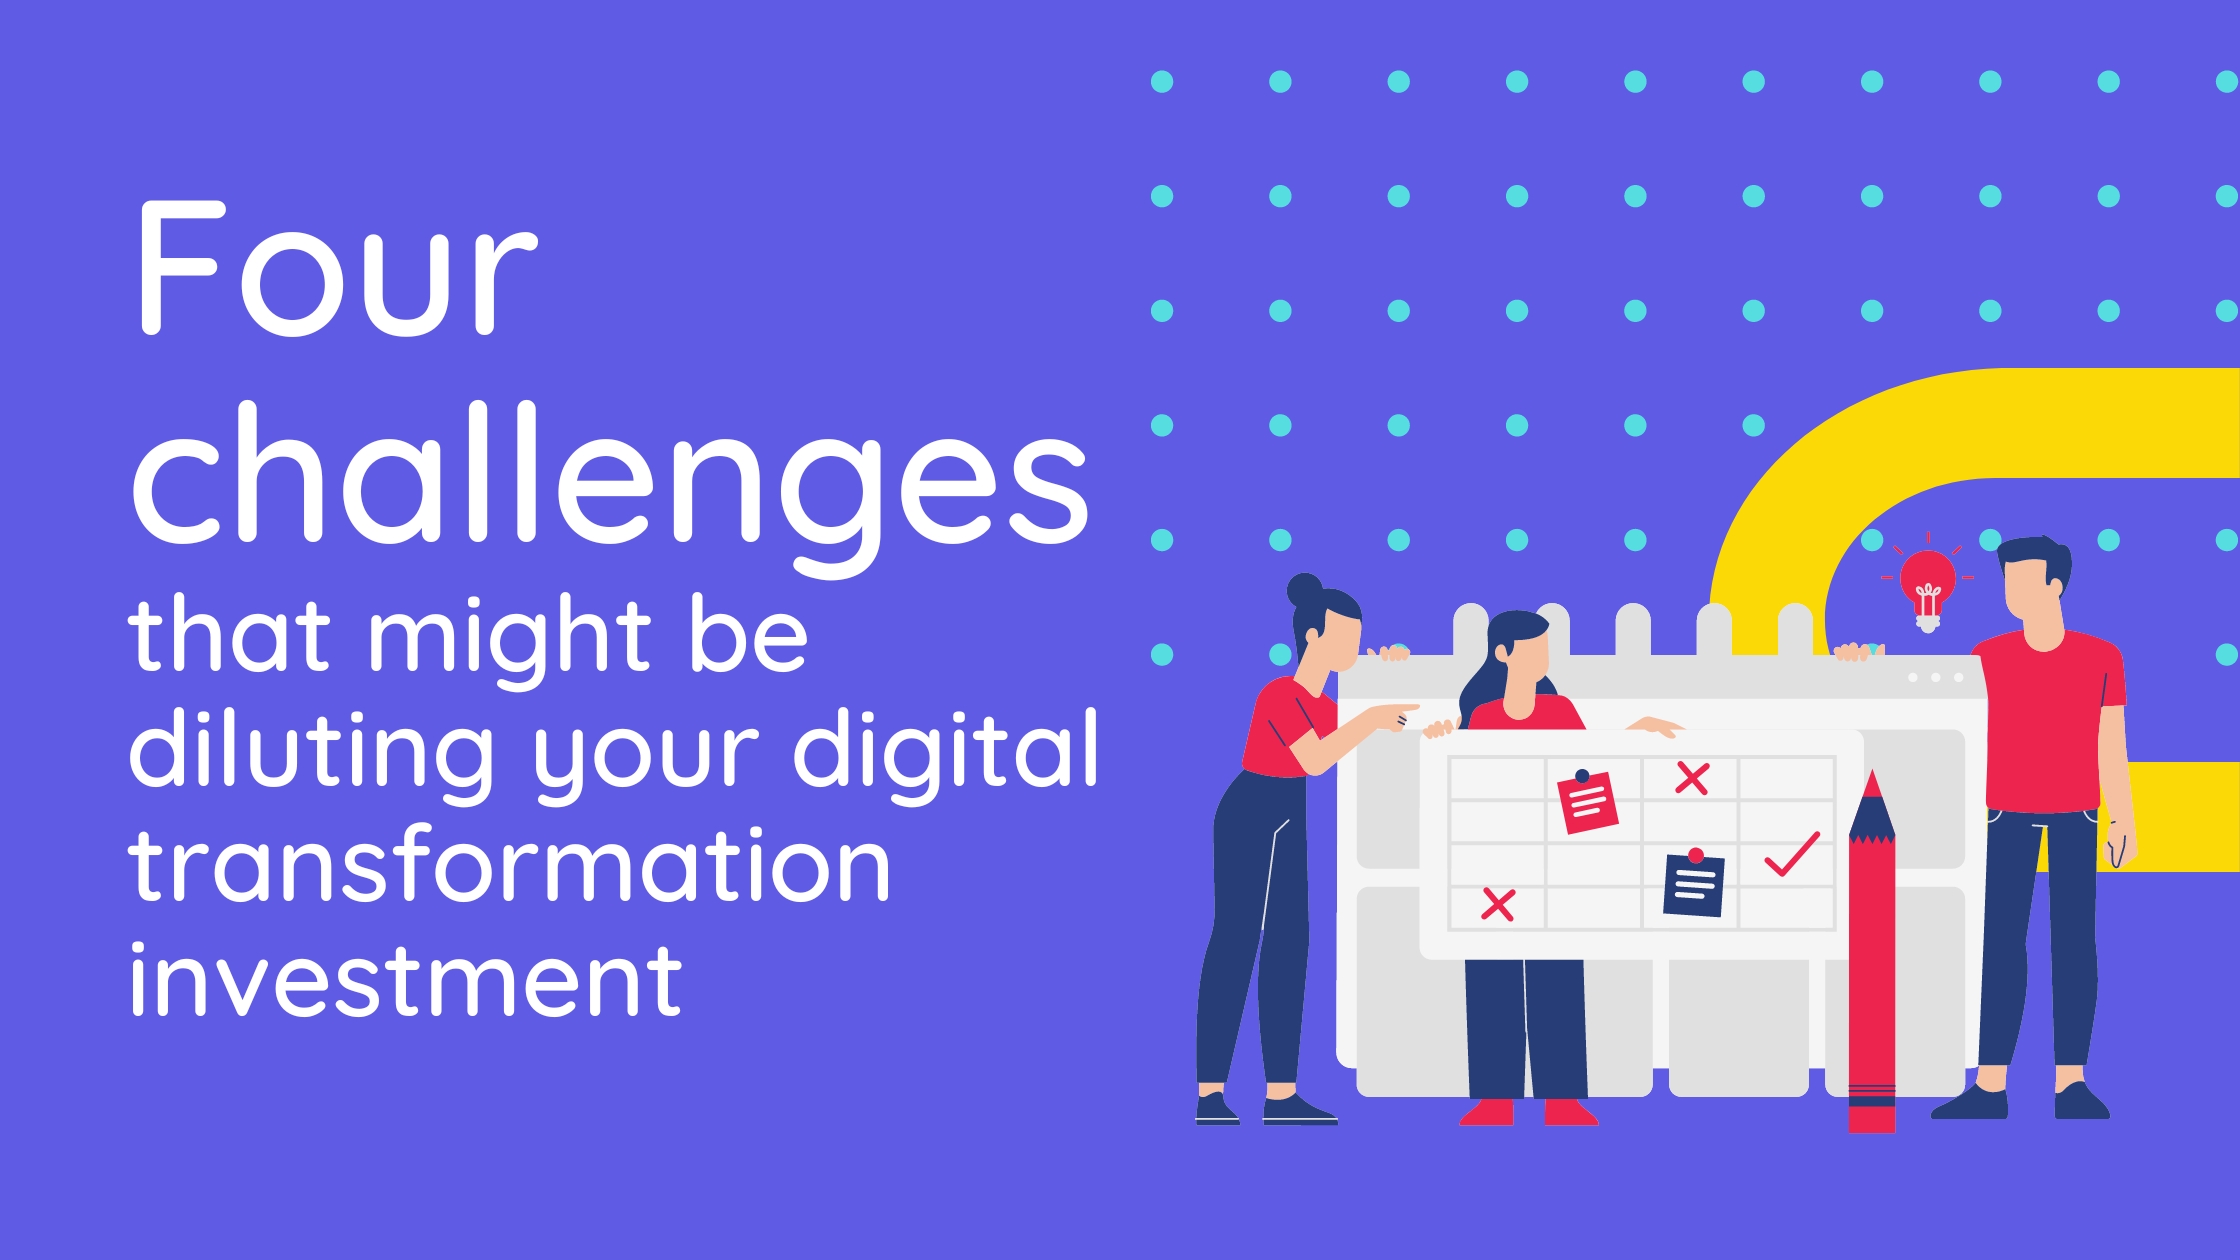 Four challenges that might be diluting your digital transformation investment